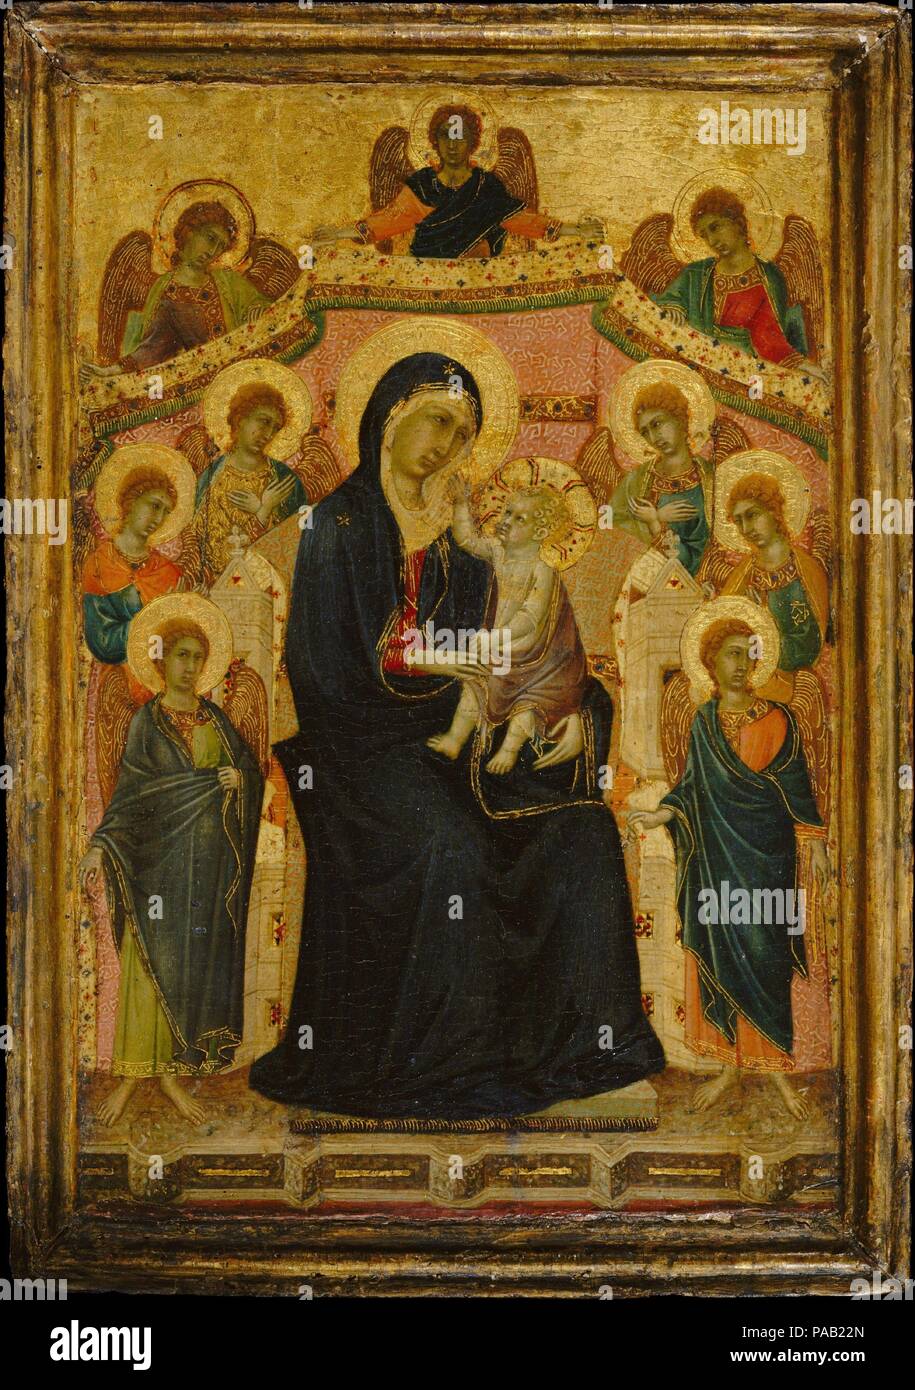 Madonna and Child with Nine Angels. Artist: Segna di Buonaventura (Italian, active Siena by 1298-died 1326/31). Dimensions: Left wing, overall, with engaged frame, 15 1/8 x 10 5/8 in. (38.4 x 27 cm); right wing, overall, with engaged frame, 15 x 10 5/8 in. (38.1 x 27 cm). Date: ca. 1315.  This panel and another in the Lehman Collection portraying the Crucifixion (1975.1.2) formed a diptych (two panels hinged together so they could open and close) and would have been used for private devotion. The radiant beauty of the Virgin's court, enhanced by the ornamental detail, contrasts with the tragic Stock Photo